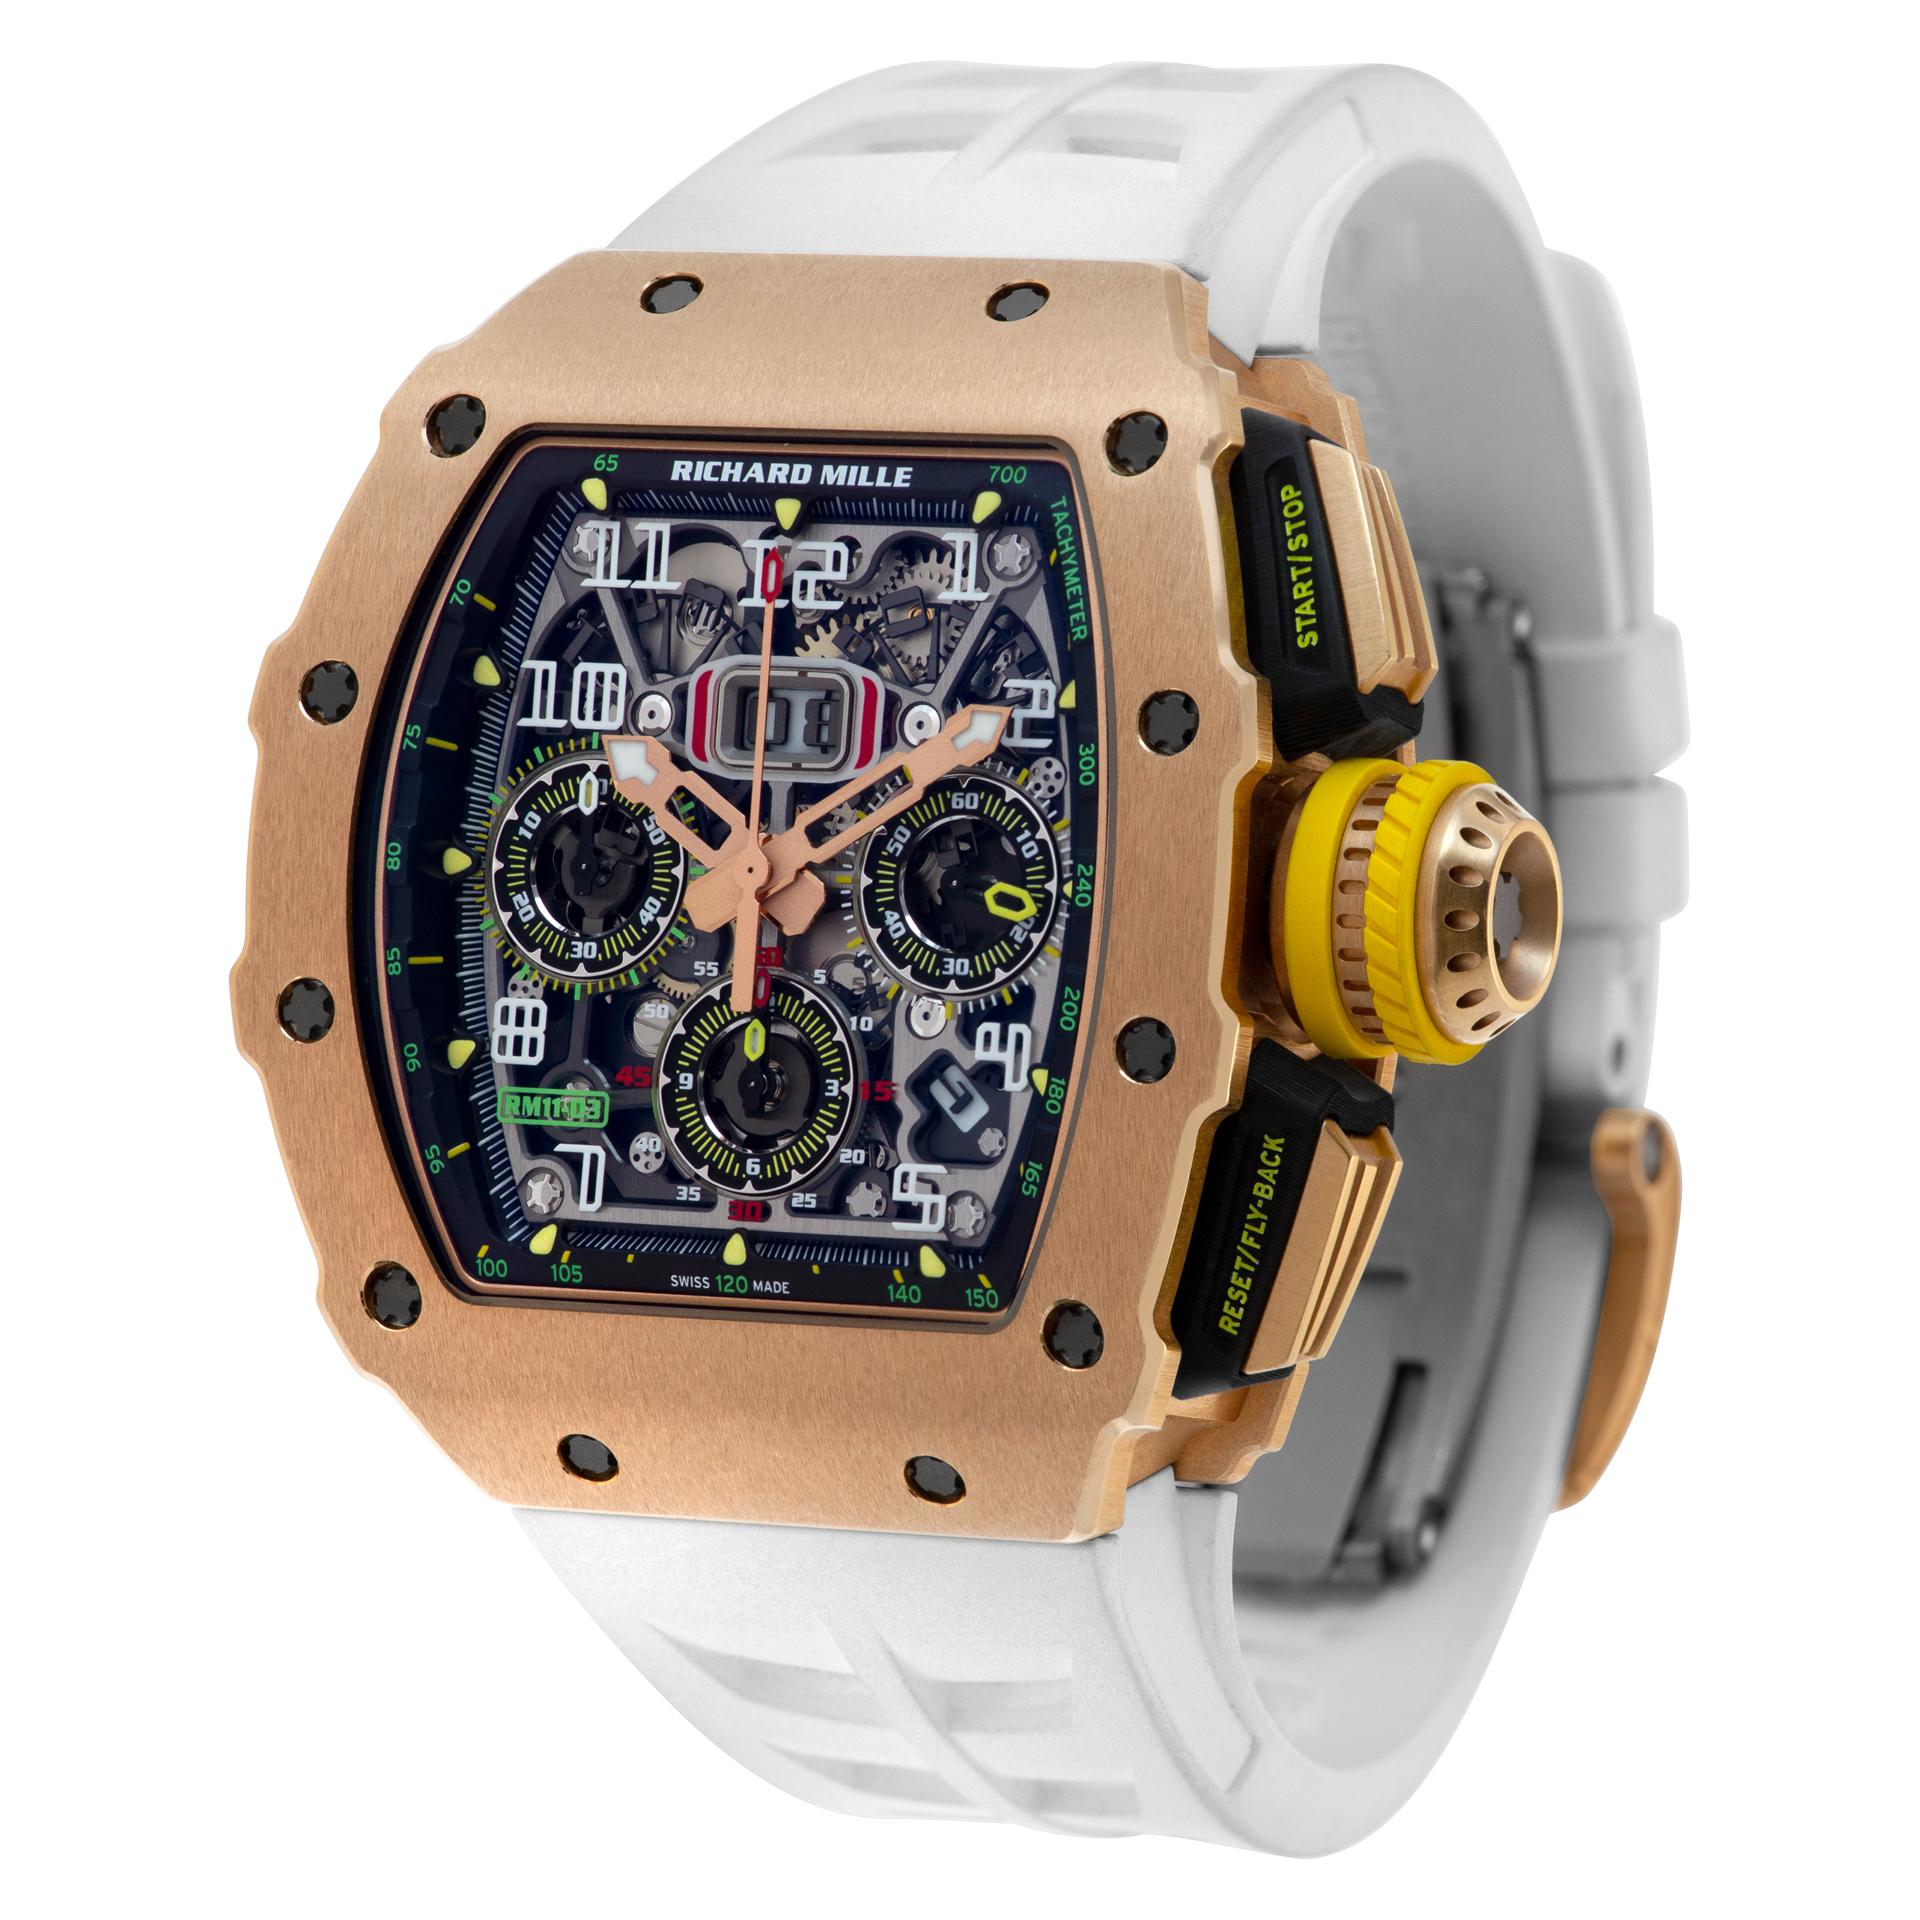 Richard Mille Flyback Chronograph in 18k rose gold on a white rubber band. Auto w/ date, month and chronograph. 45 mm case size. With box and papers, warranty card and certificate, sealed, never opened. Ref RM11-03 RG. Crown designed of wheel and